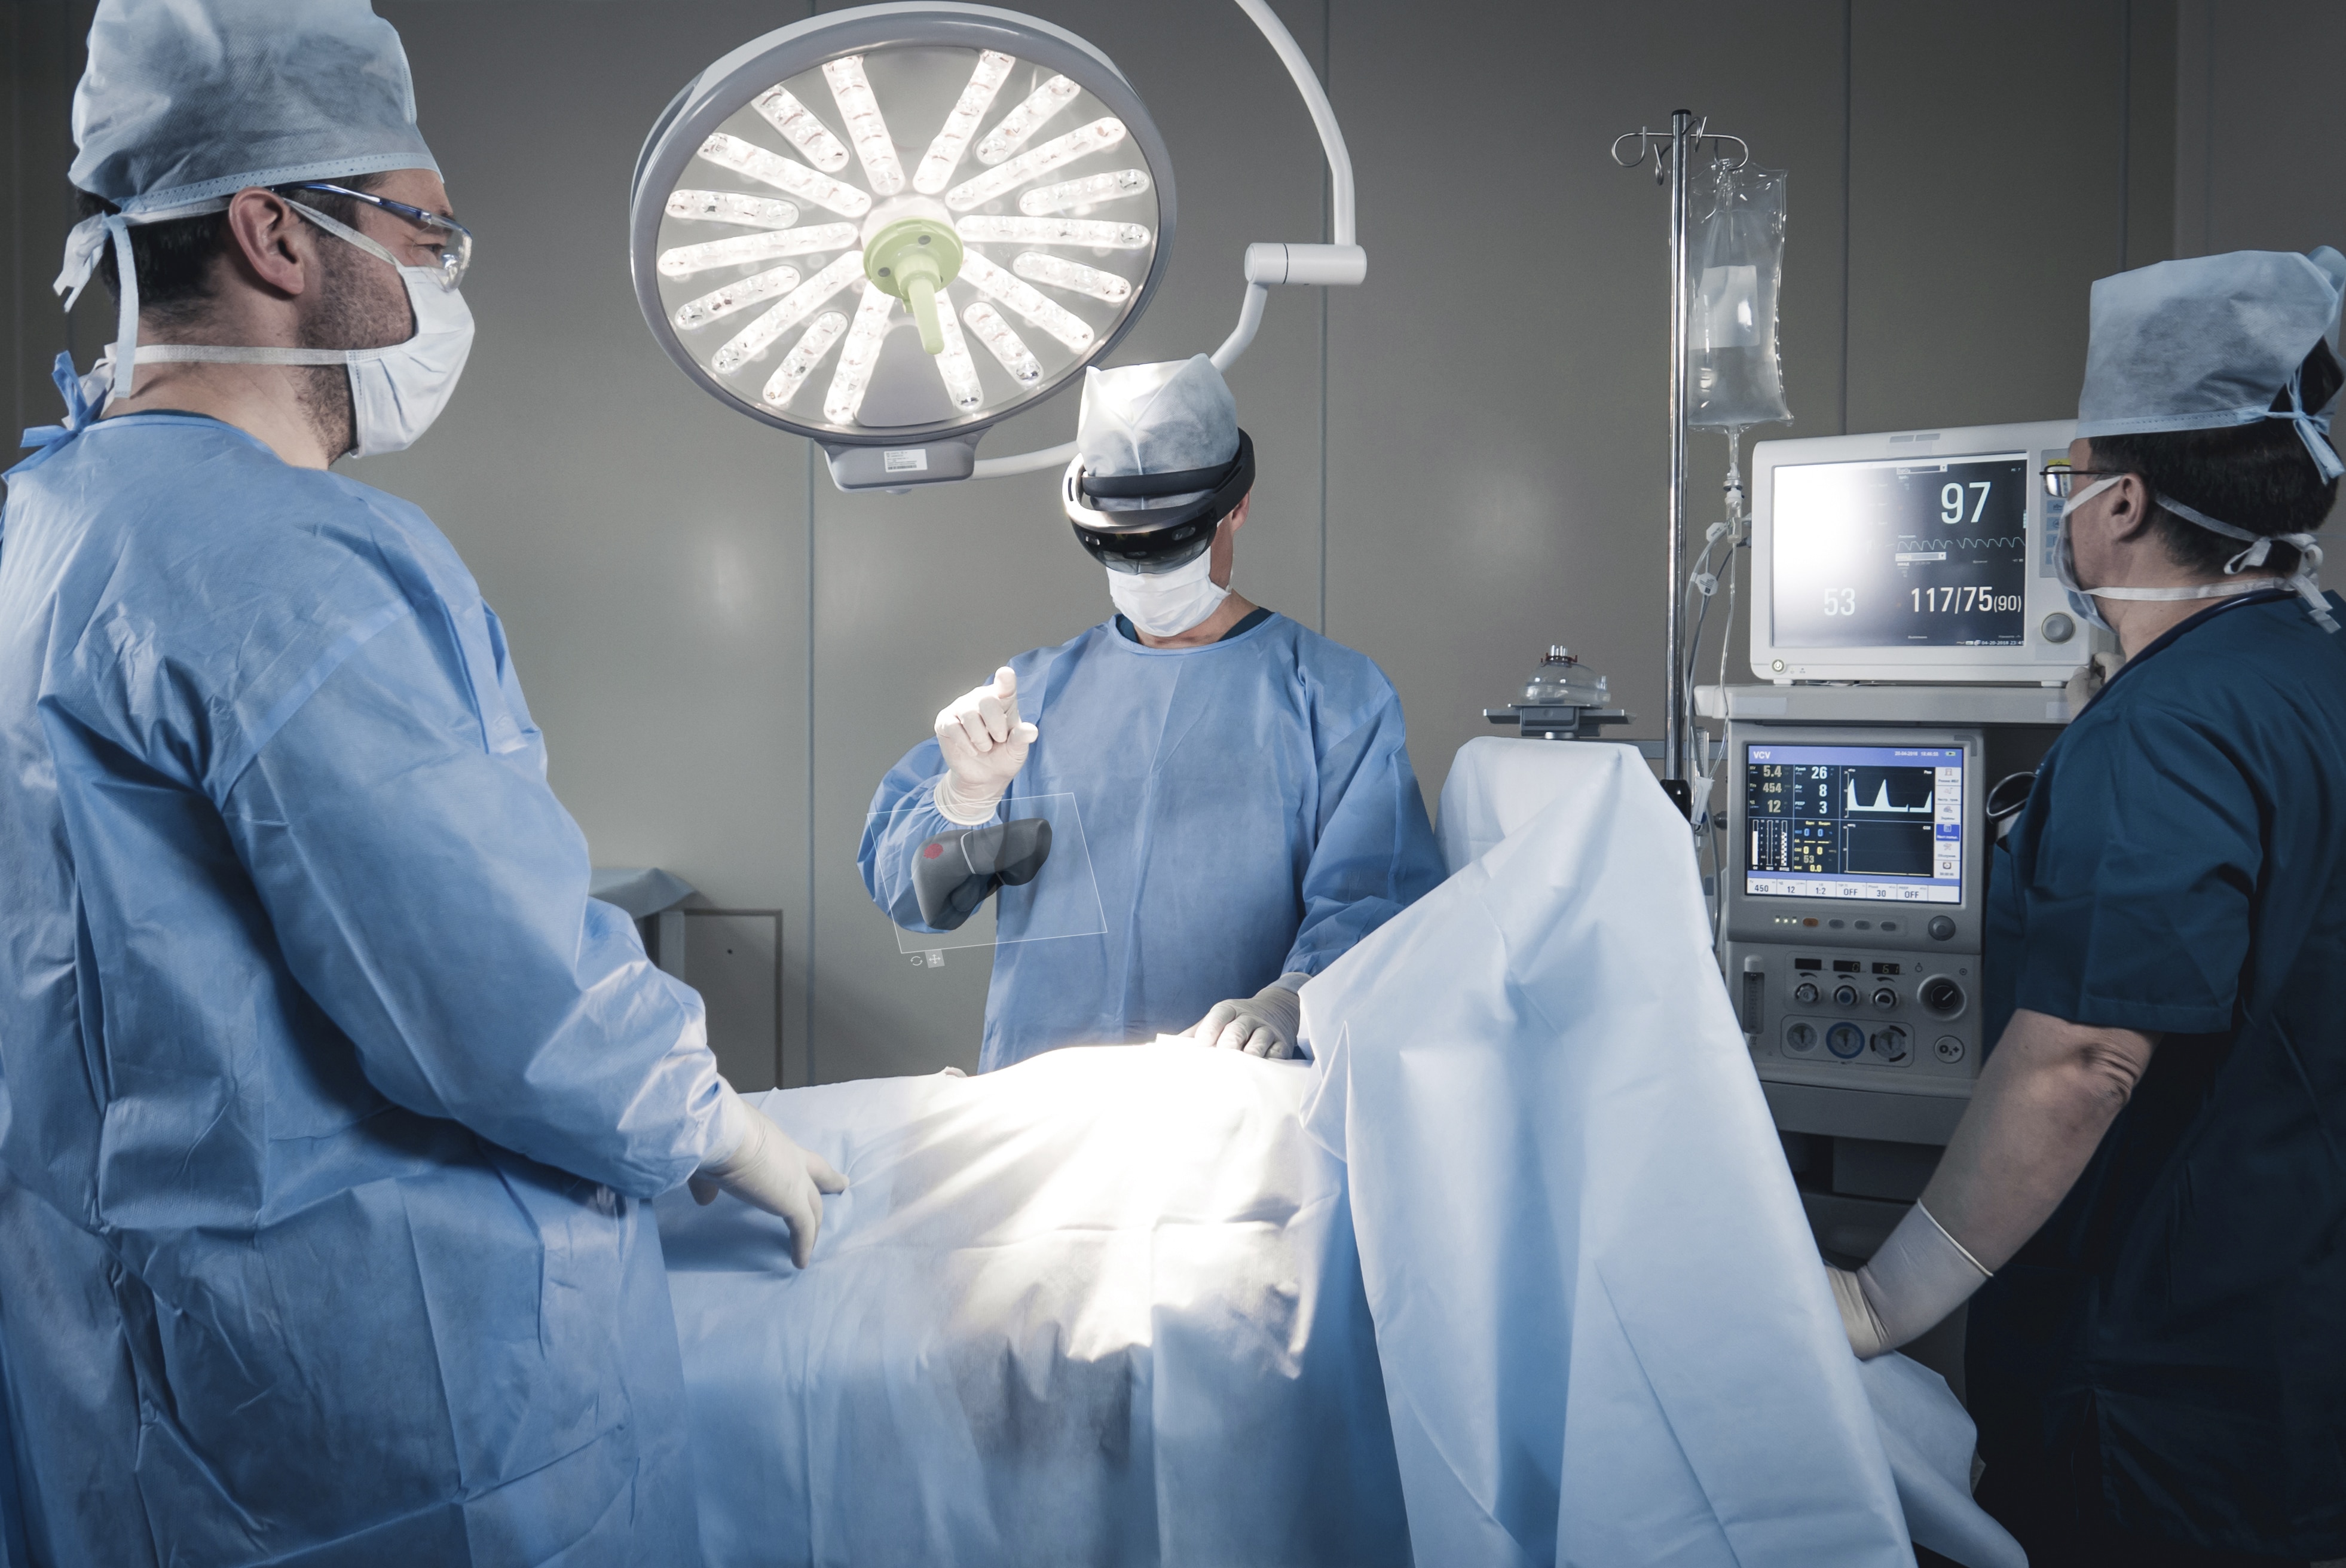 An Intelligent Platform for the Operating Room of the Future